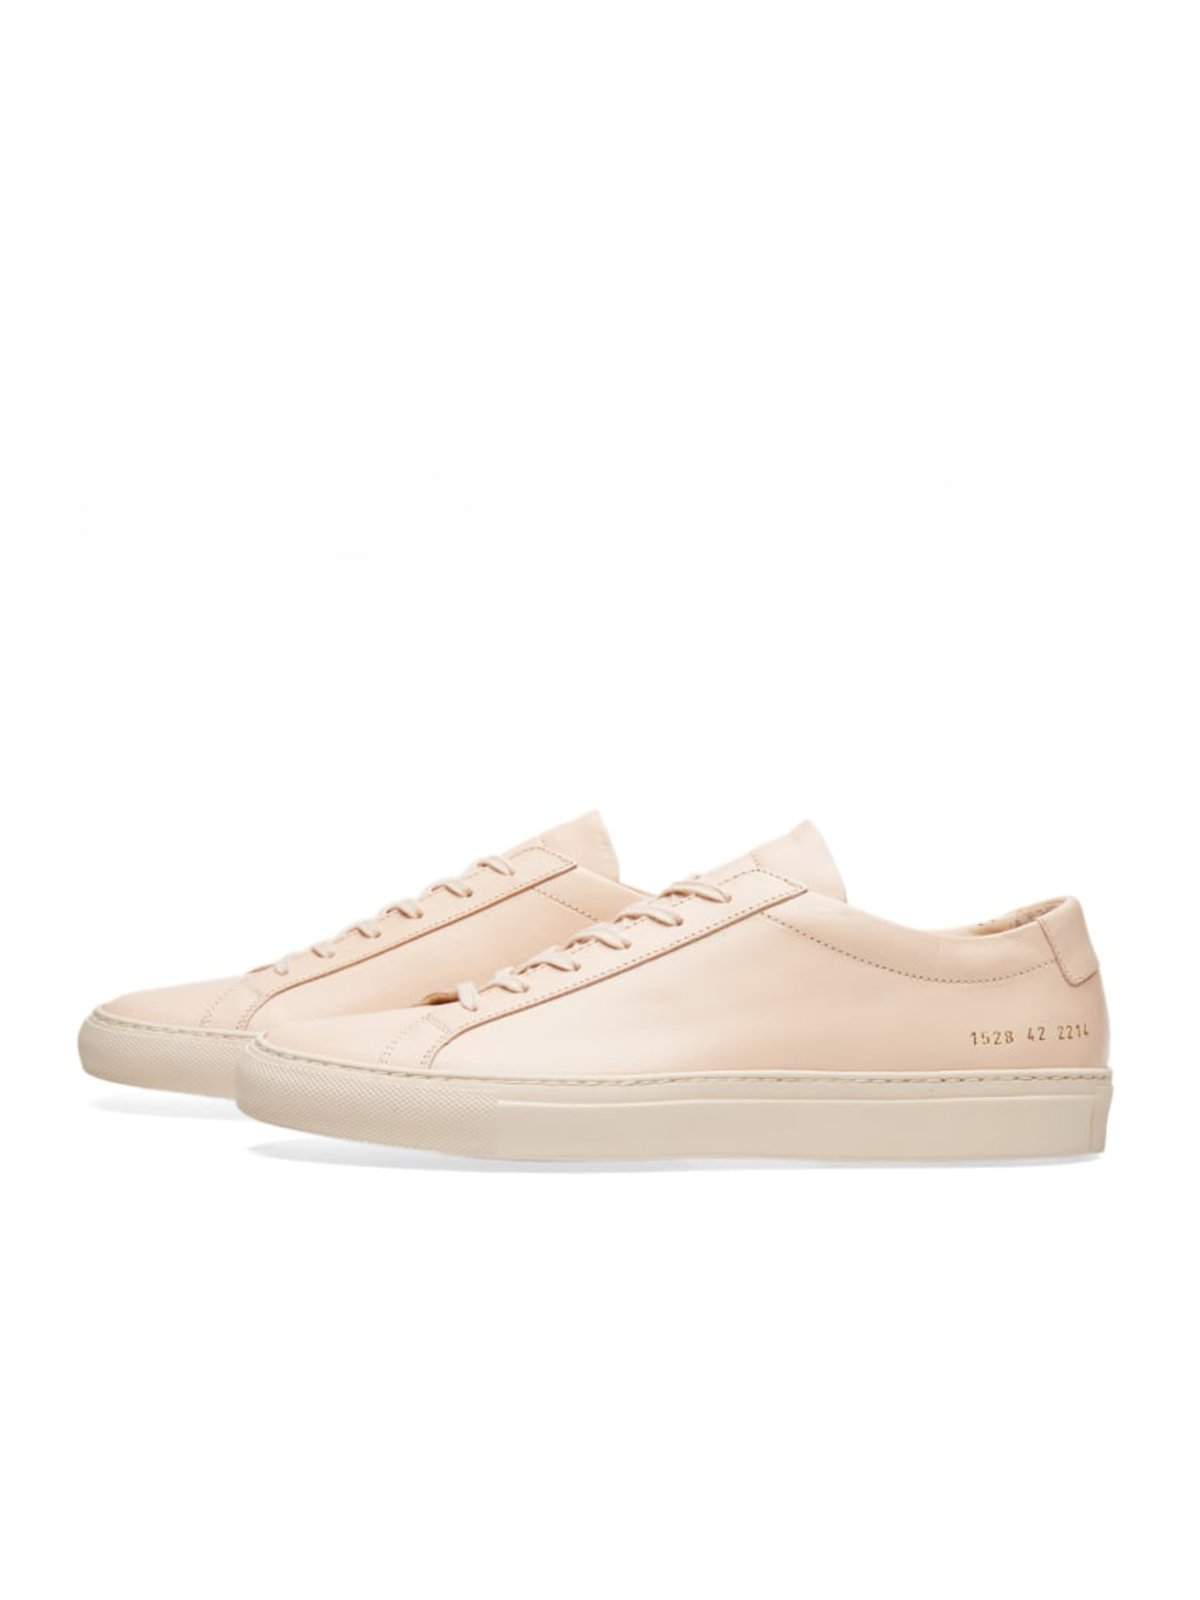 Common Projects Original Achilles Low Natural - MORE by Morello Indonesia